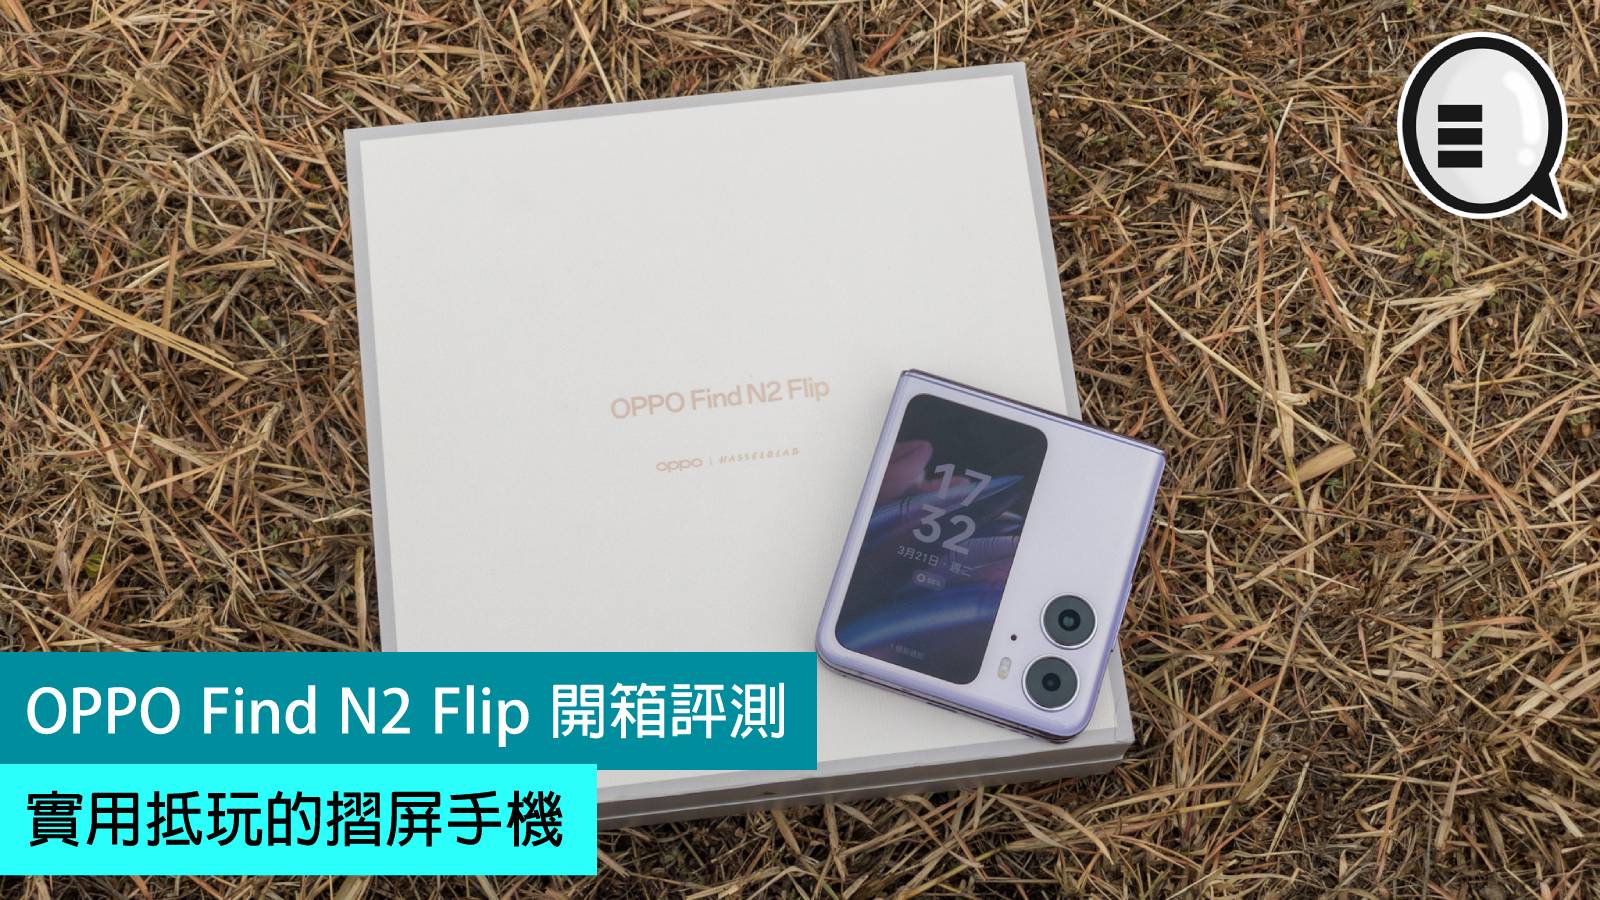 OPPO Find N2 Flip Unboxing Review: A Practical and Playable Folding Phone